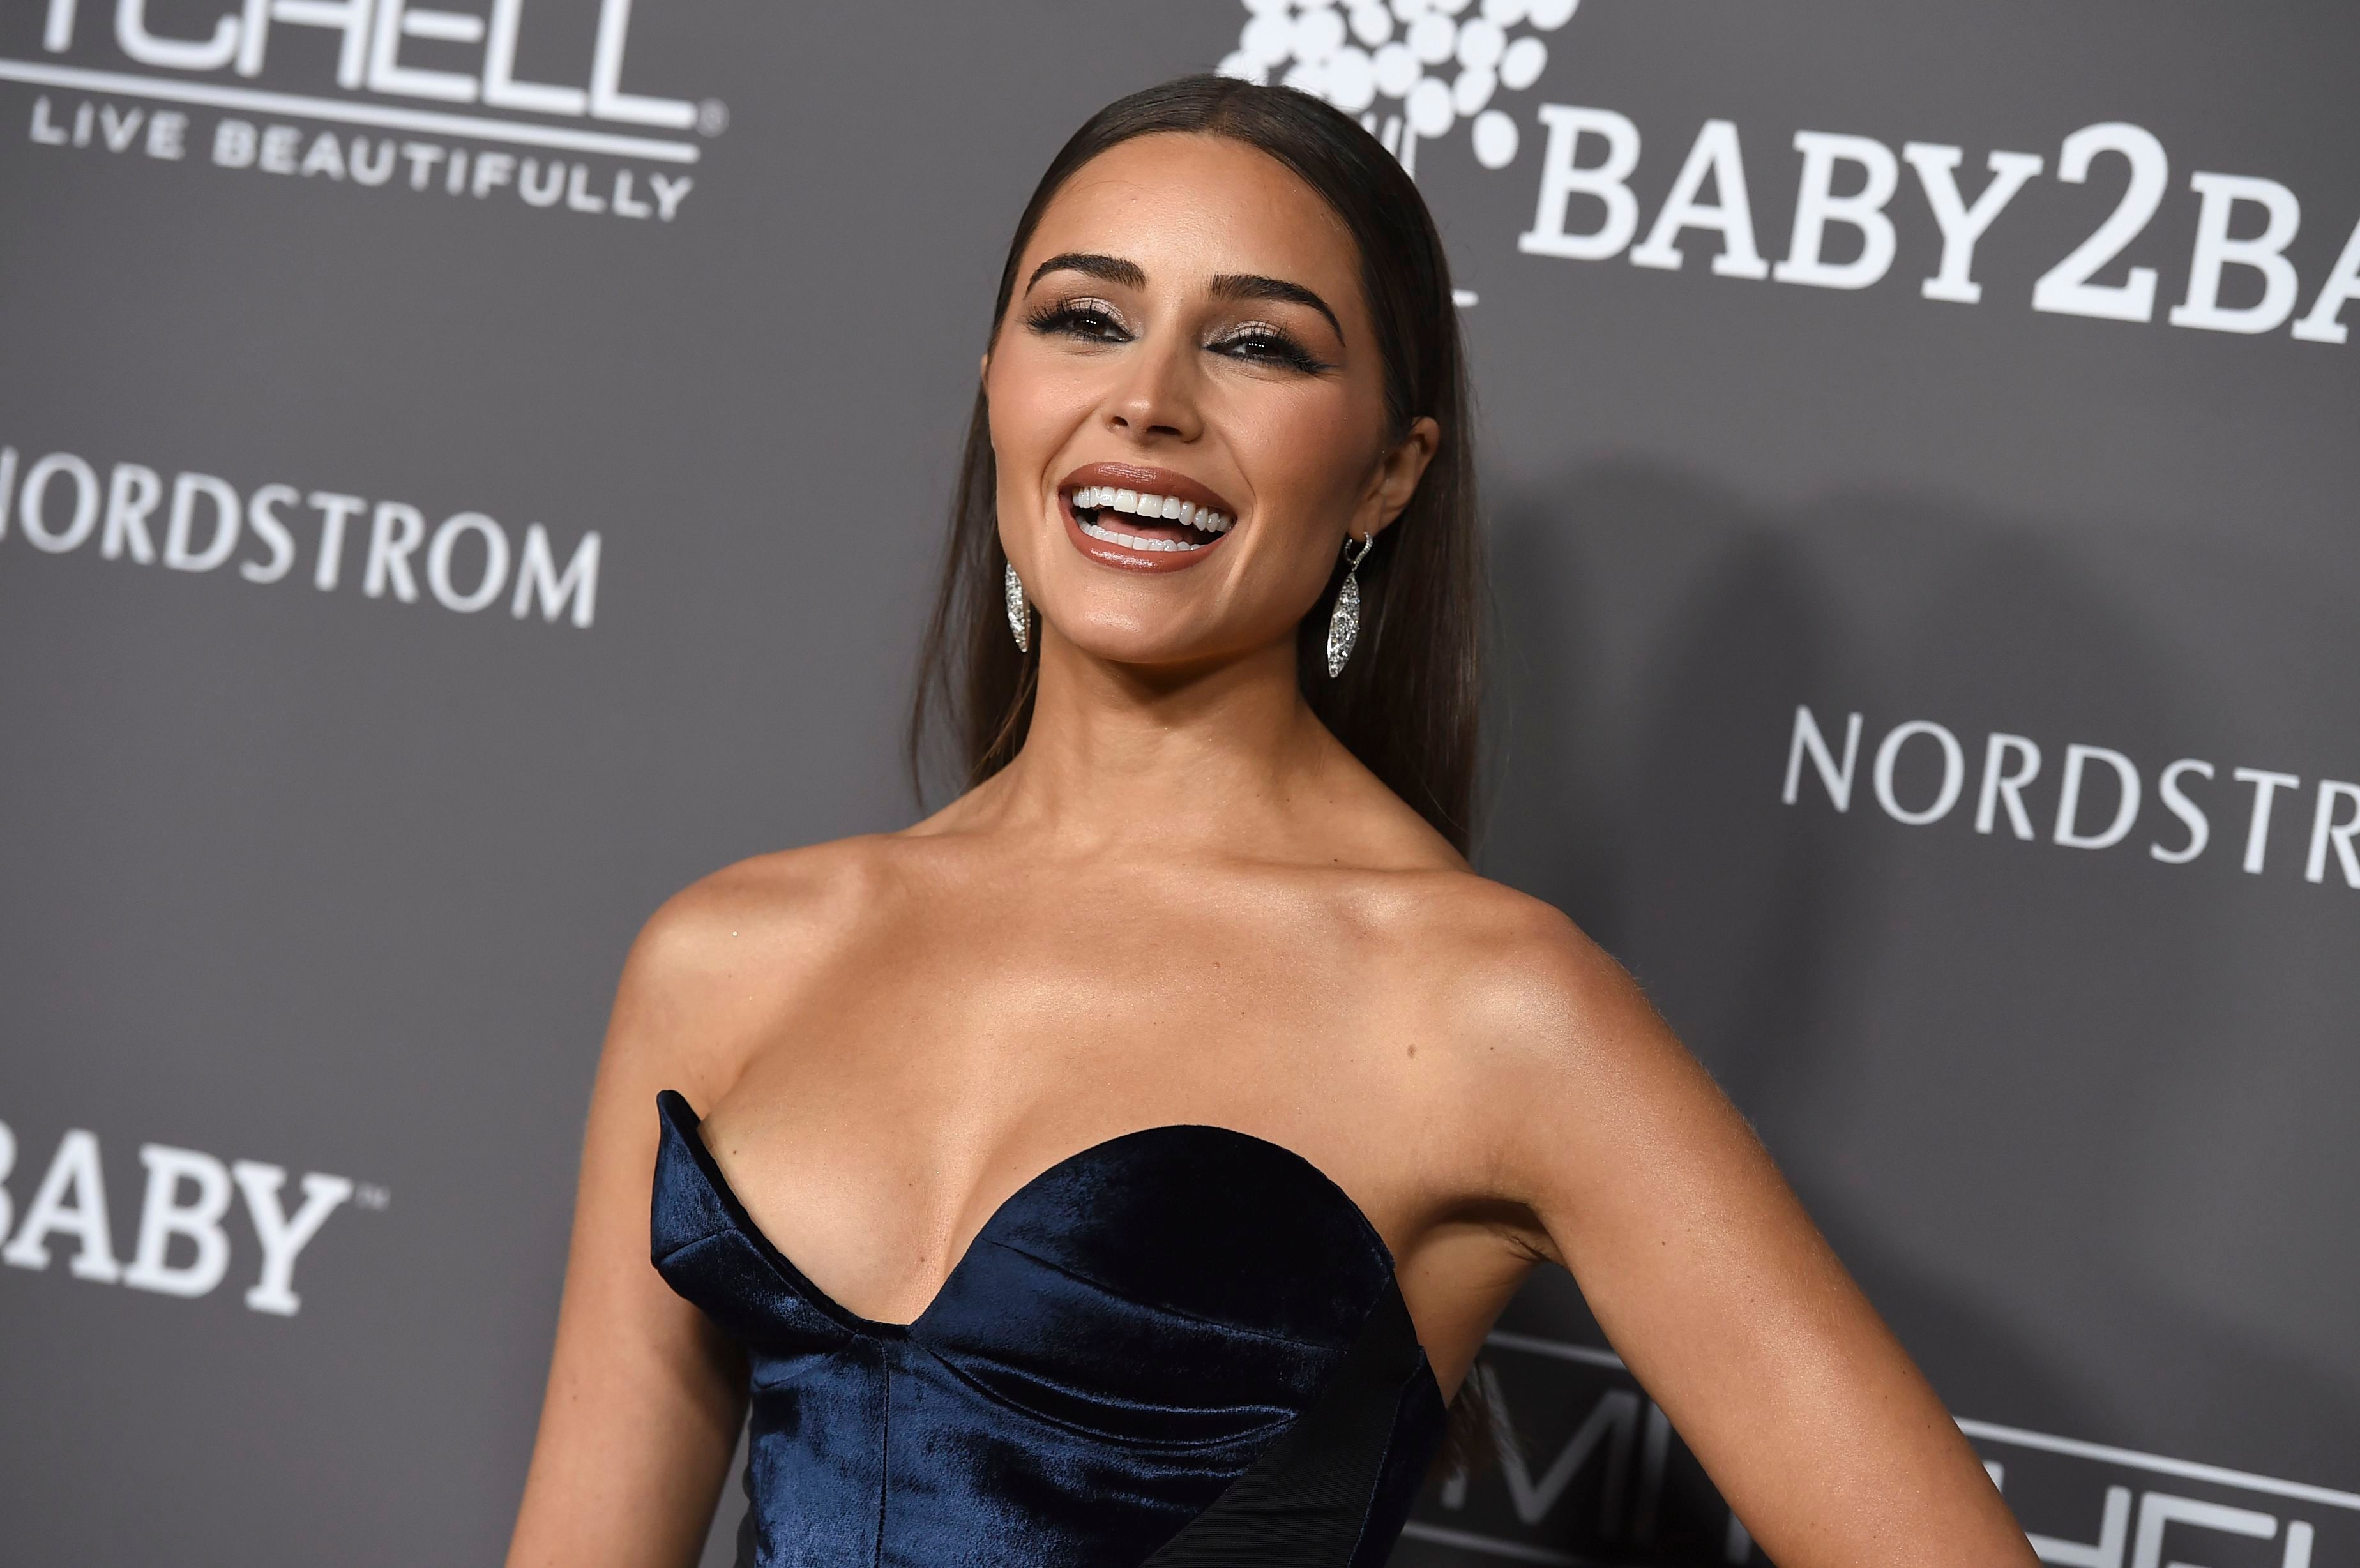 The brunette beautyâ€™s assets nearly fell out of the top of her navy blue gown at the 2018 Baby2Baby Gala.